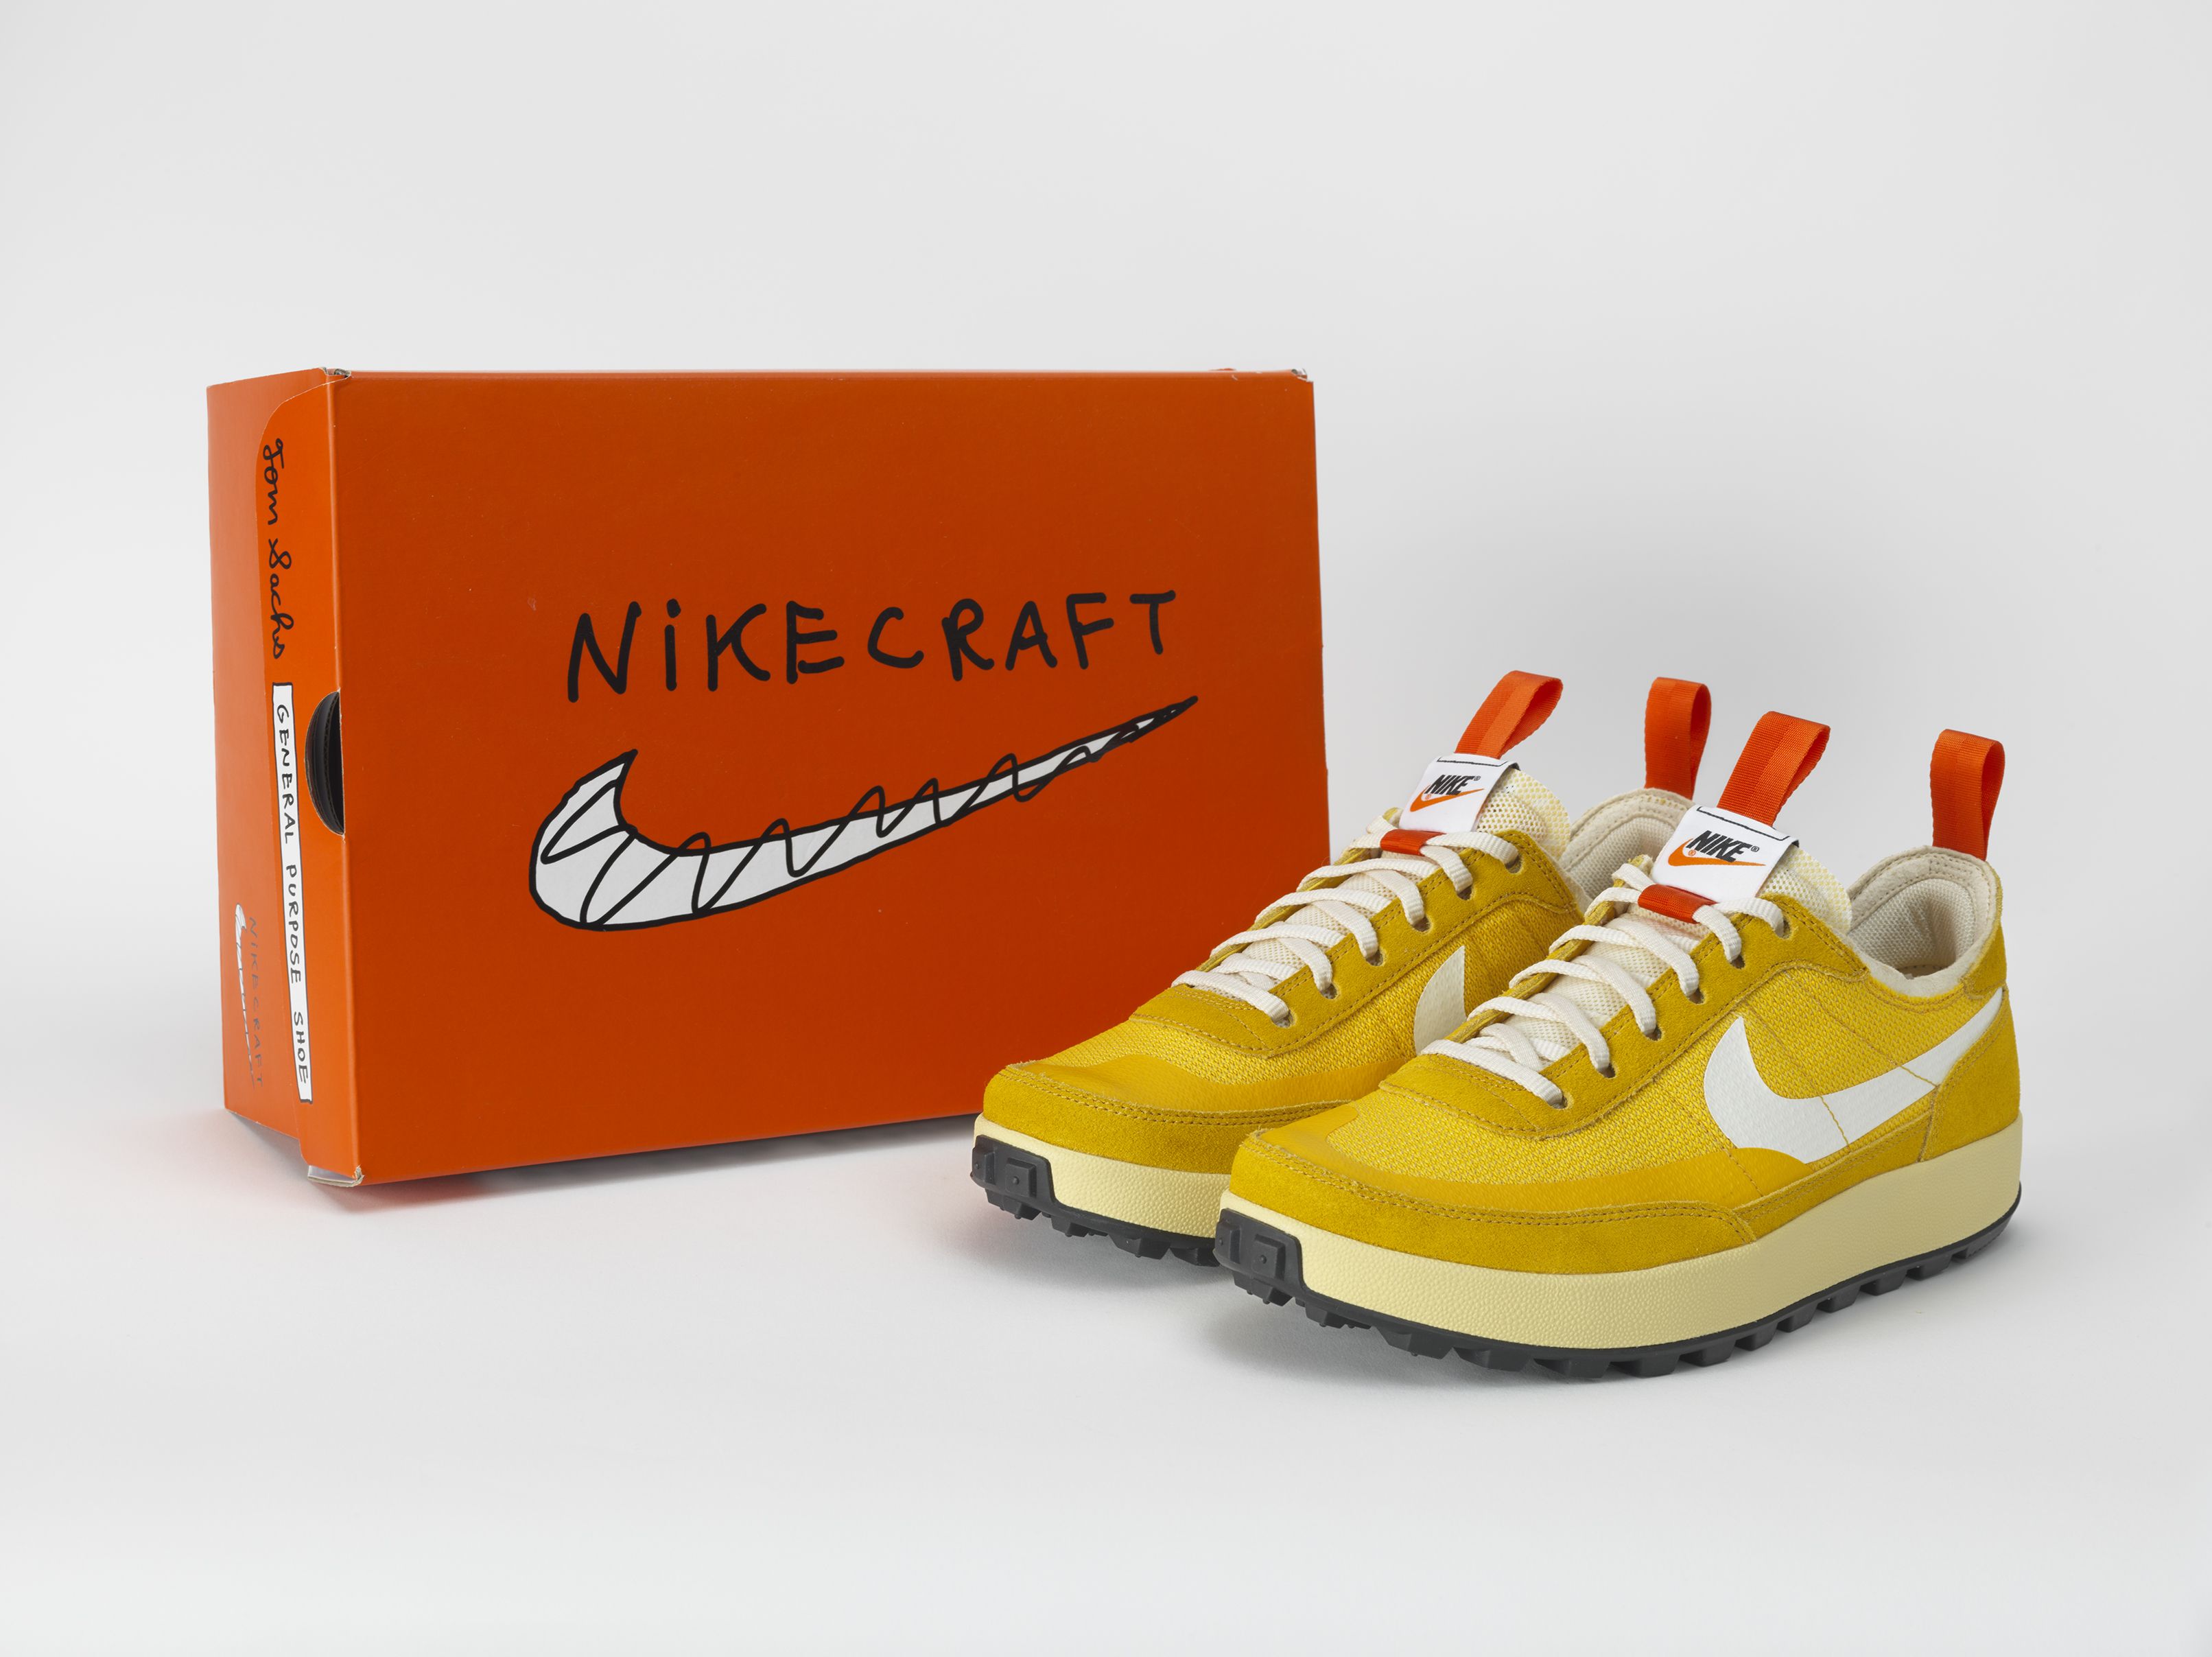 Tom Sachs on the General Purpose Shoe NikeCraft's Success